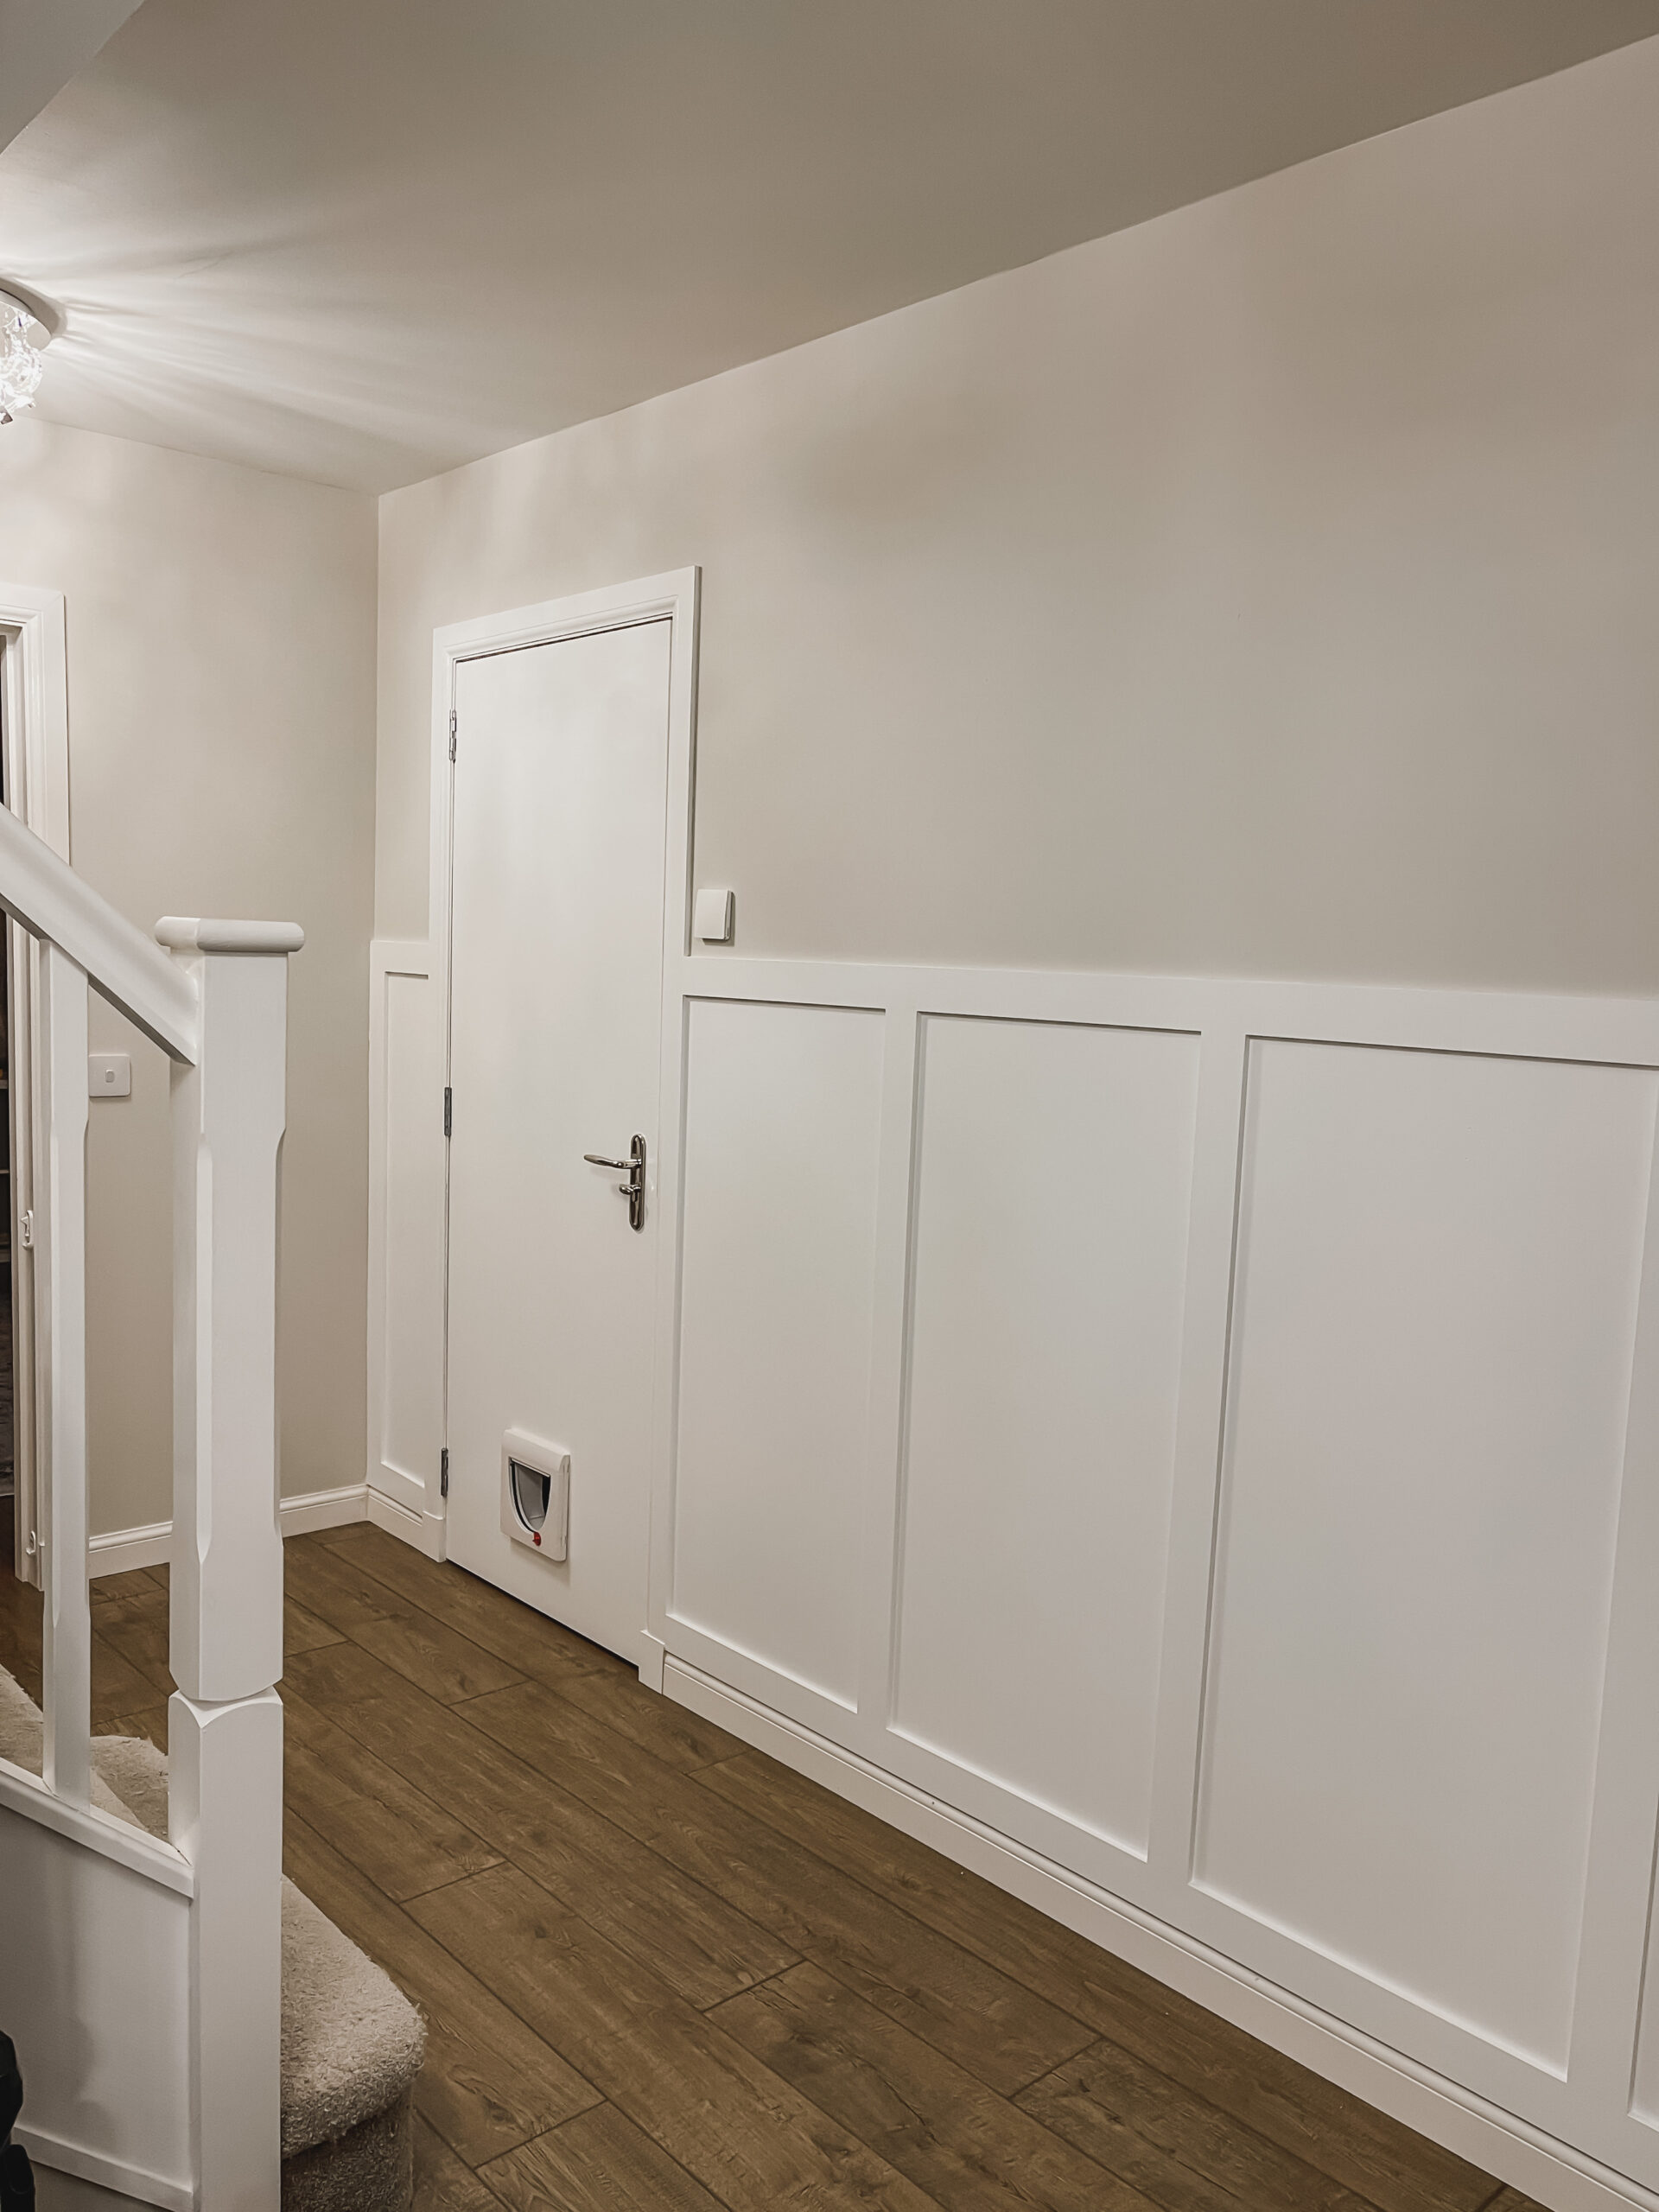 wainscotting and painting the hallway